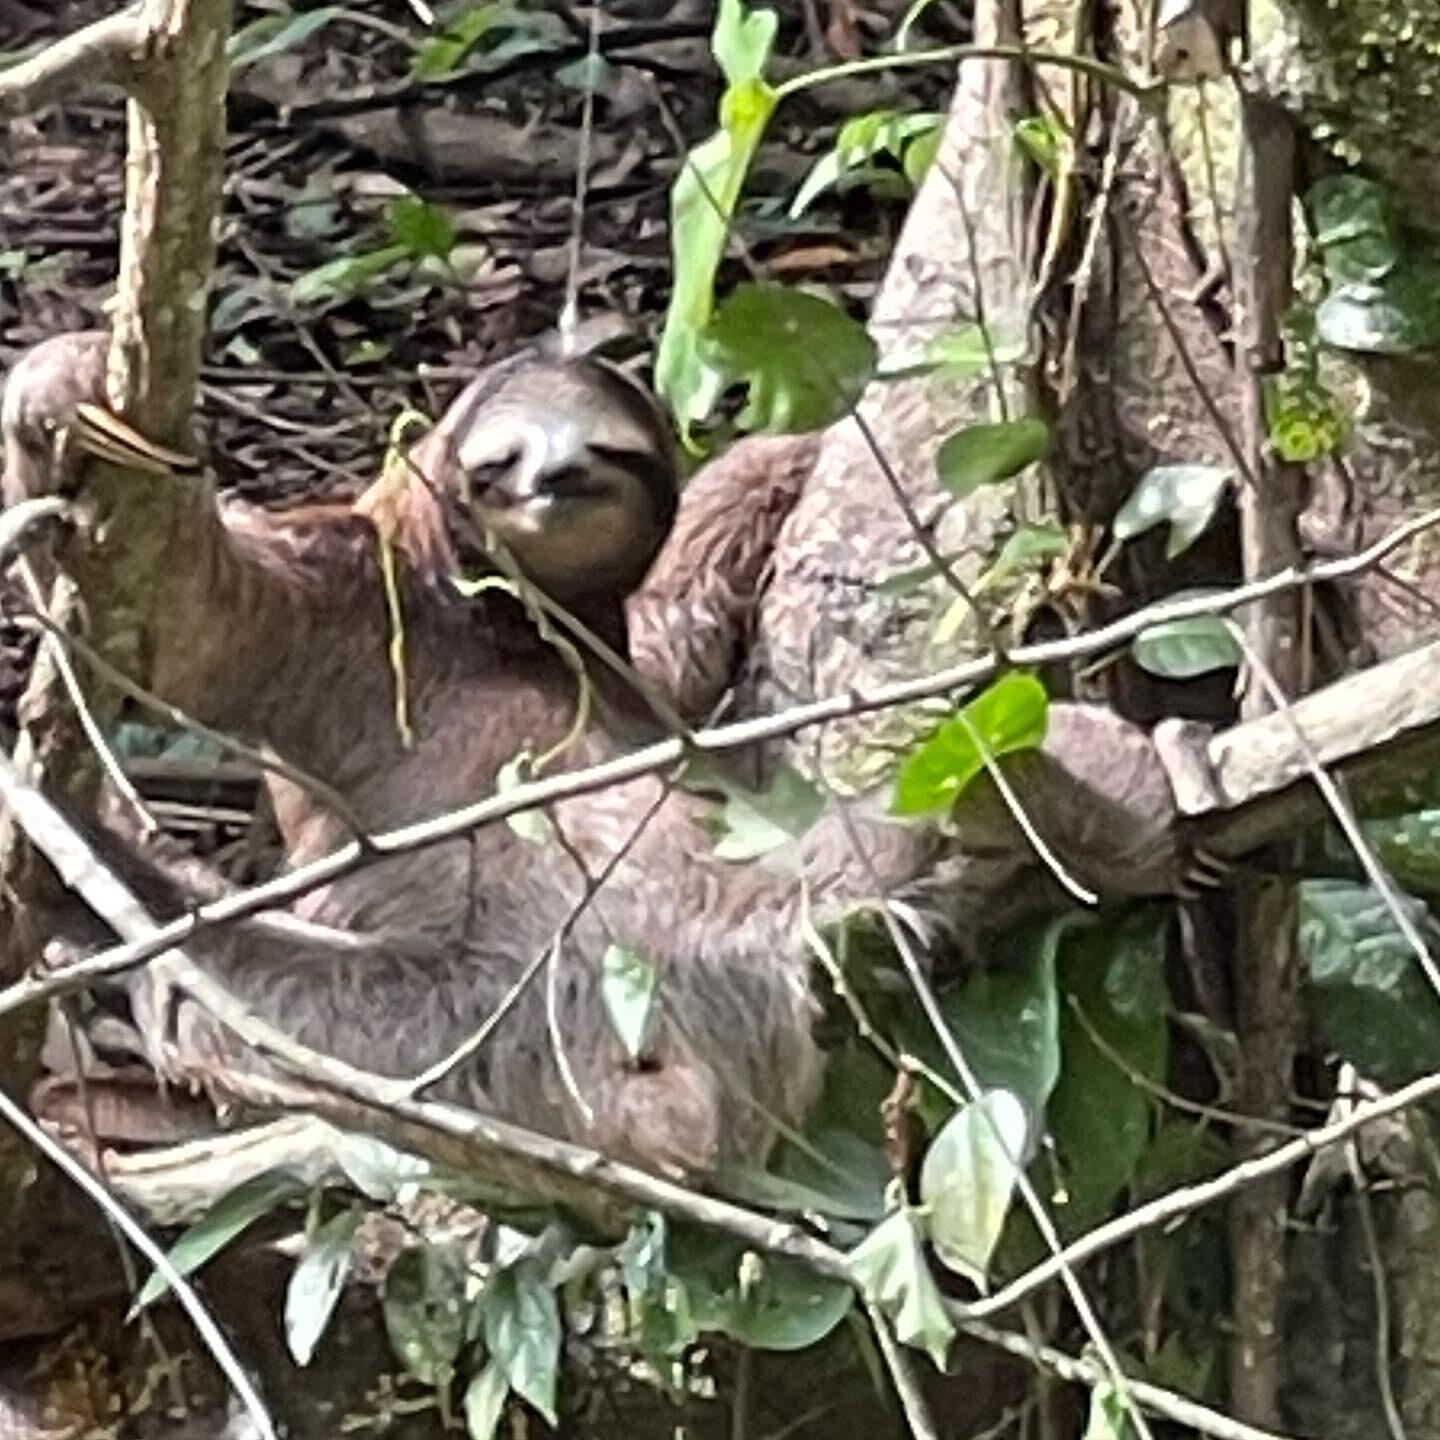 This three fingered sloth had just crossed the road and made it safely to this tree. Luckily, everyone on the road stopped their cars to let him pass. Remember to always maintain a distance of at least 10 feet from wildlife. That&rsquo;s what the zoo